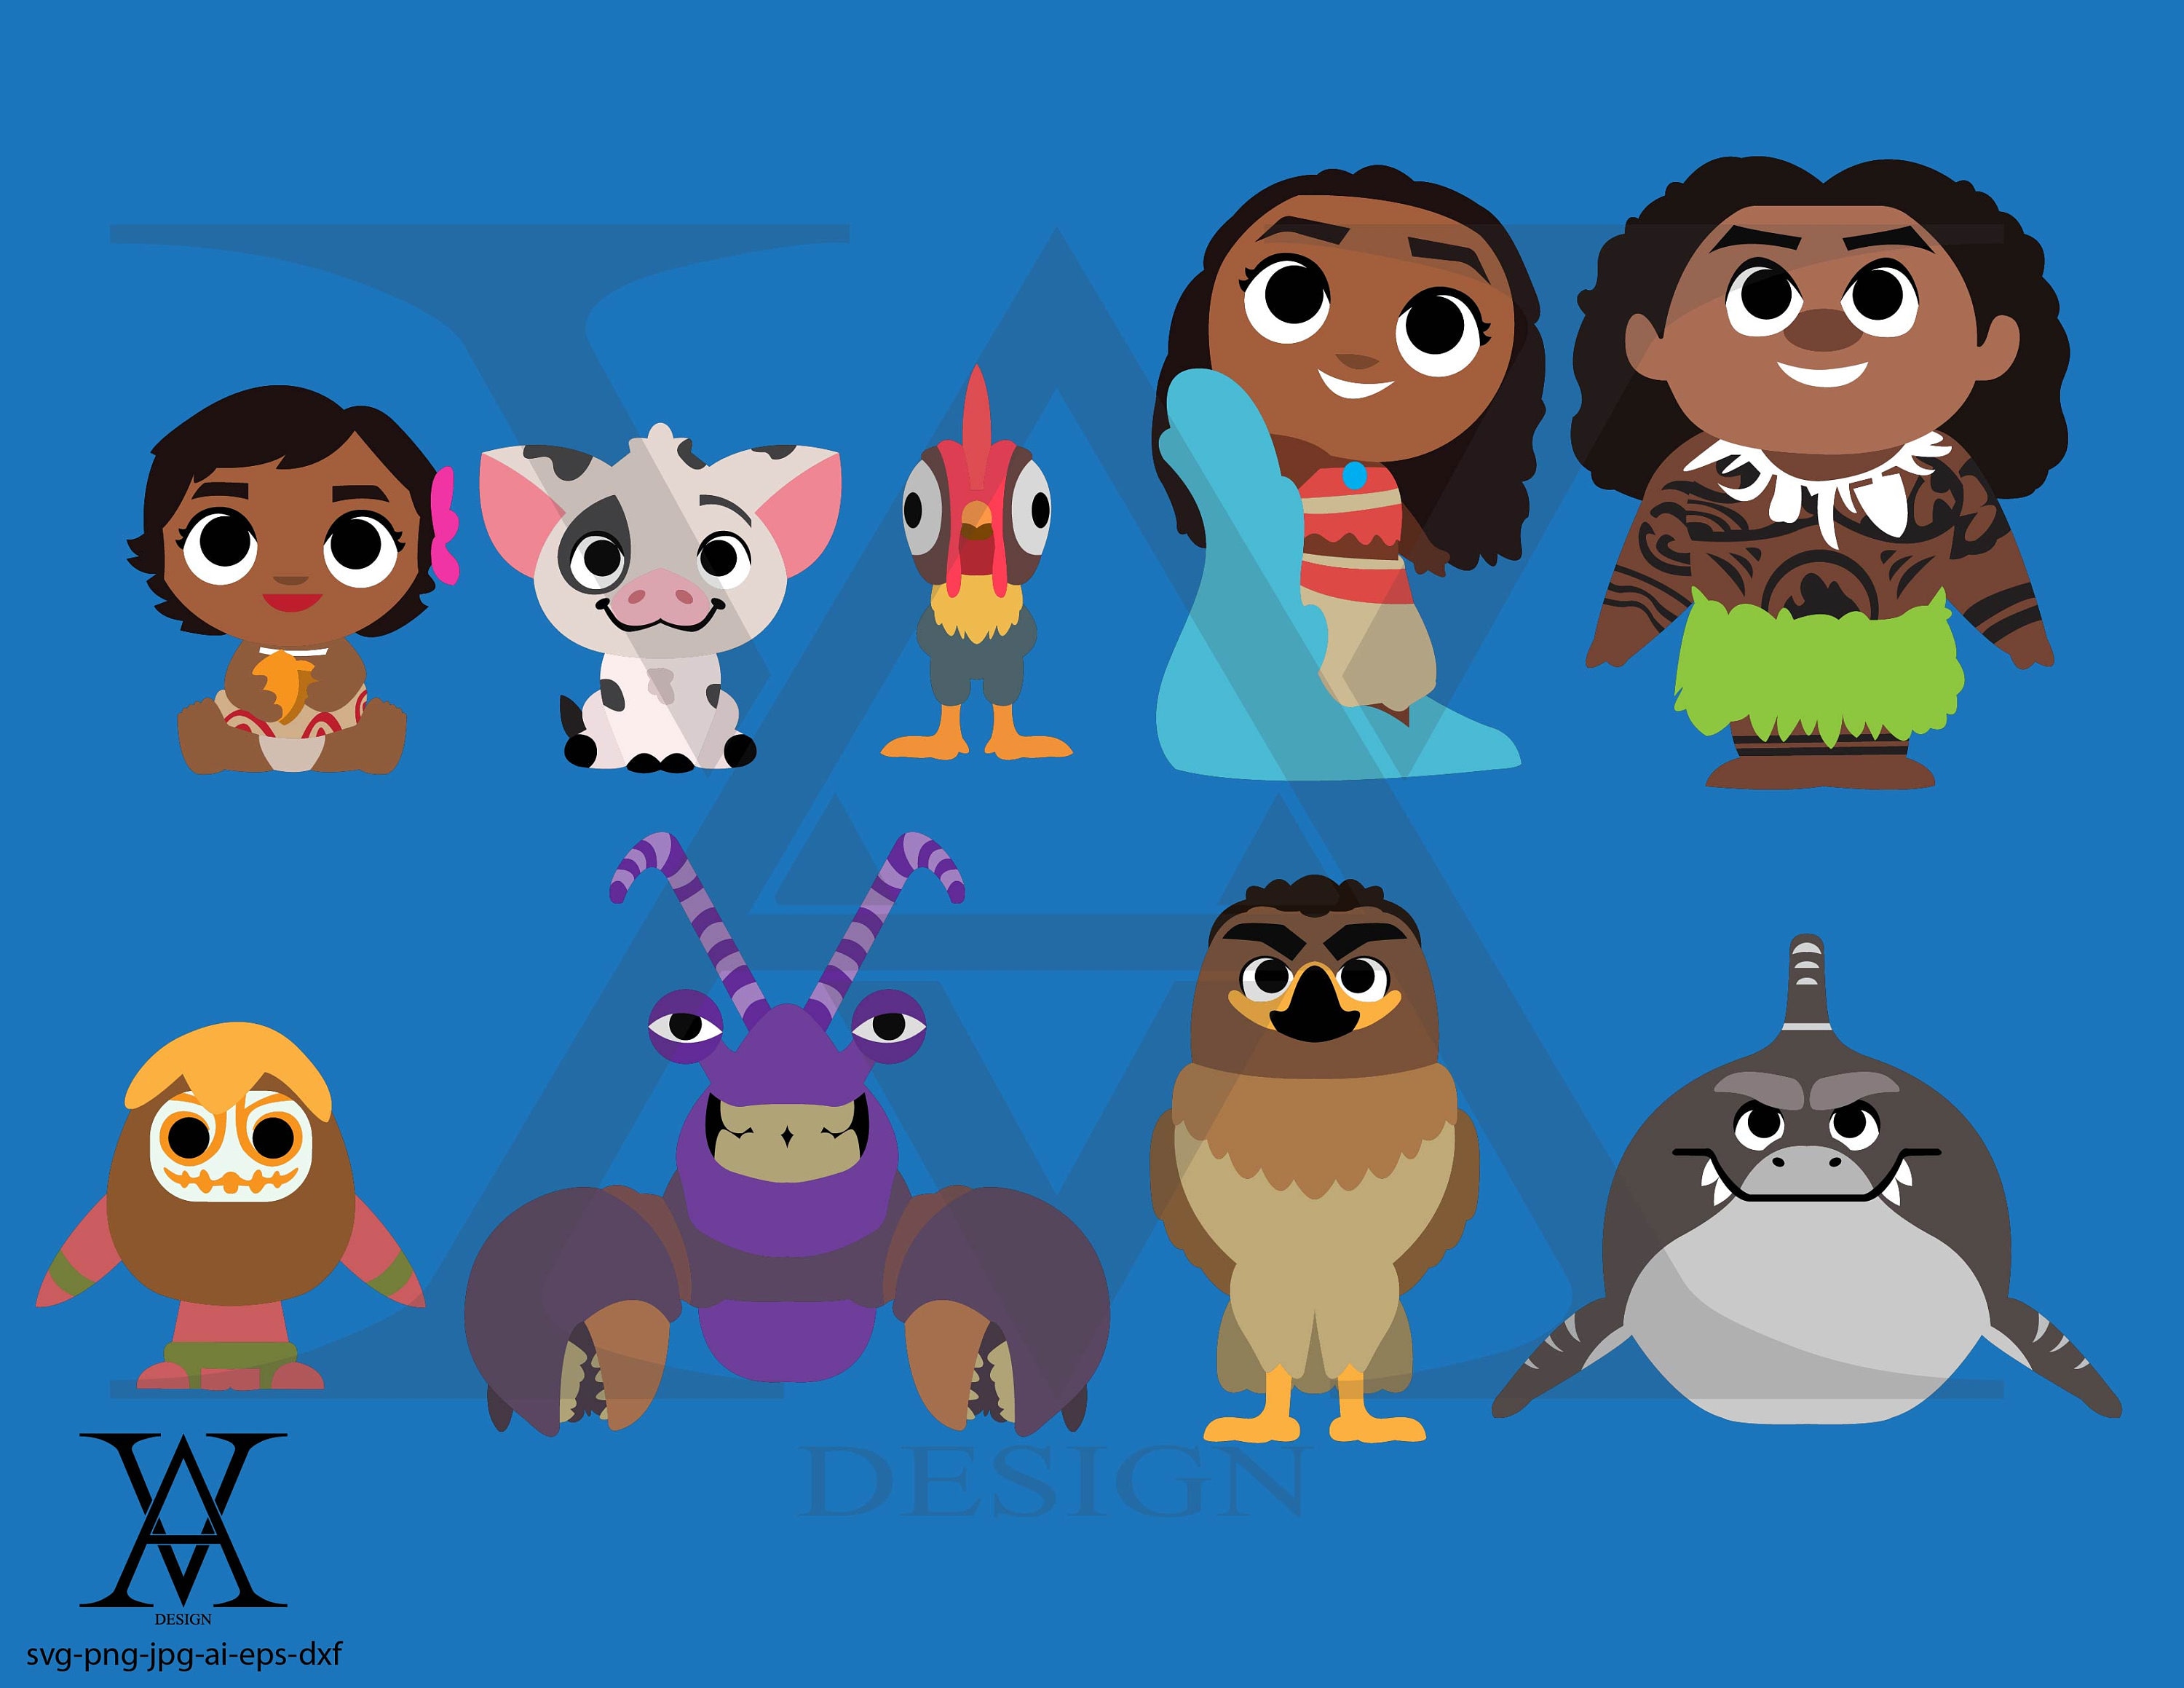 Moana Characters Clipart Vector. INSTANT DOWNLOAD - Etsy